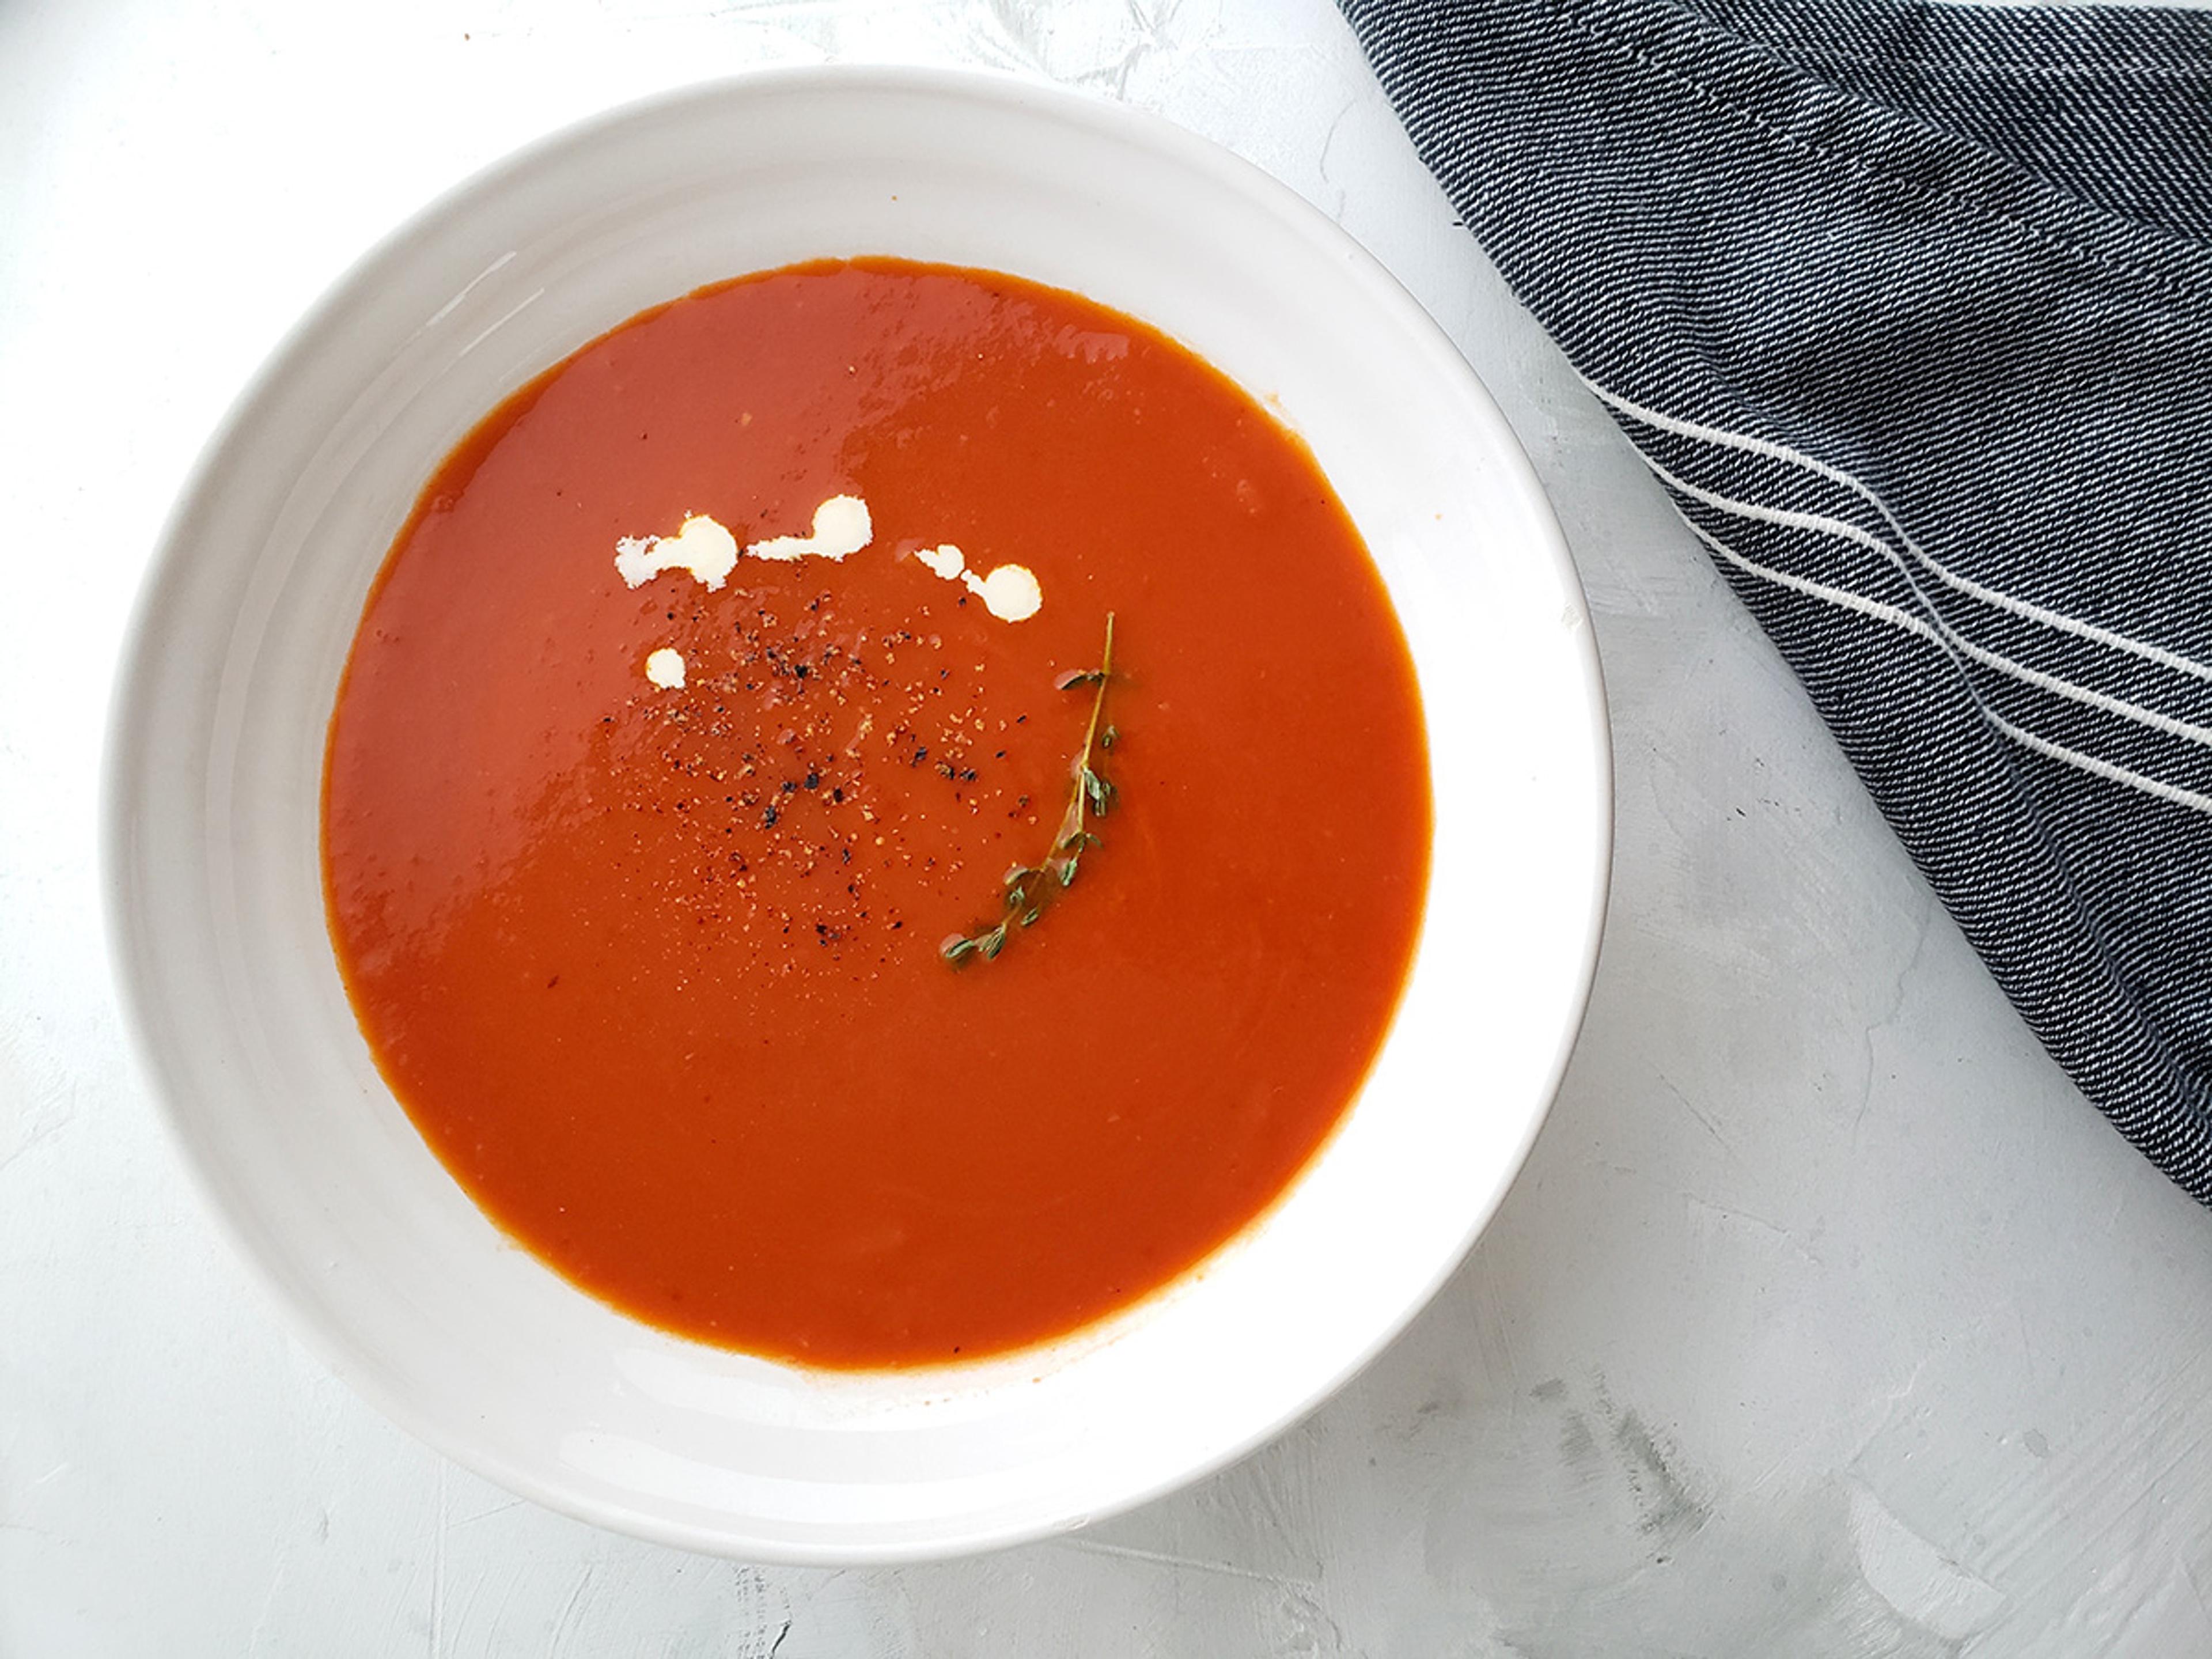 Lovely red tomato soup sprinkled with pepper, a few drops of white cream, and a thyme sprig.